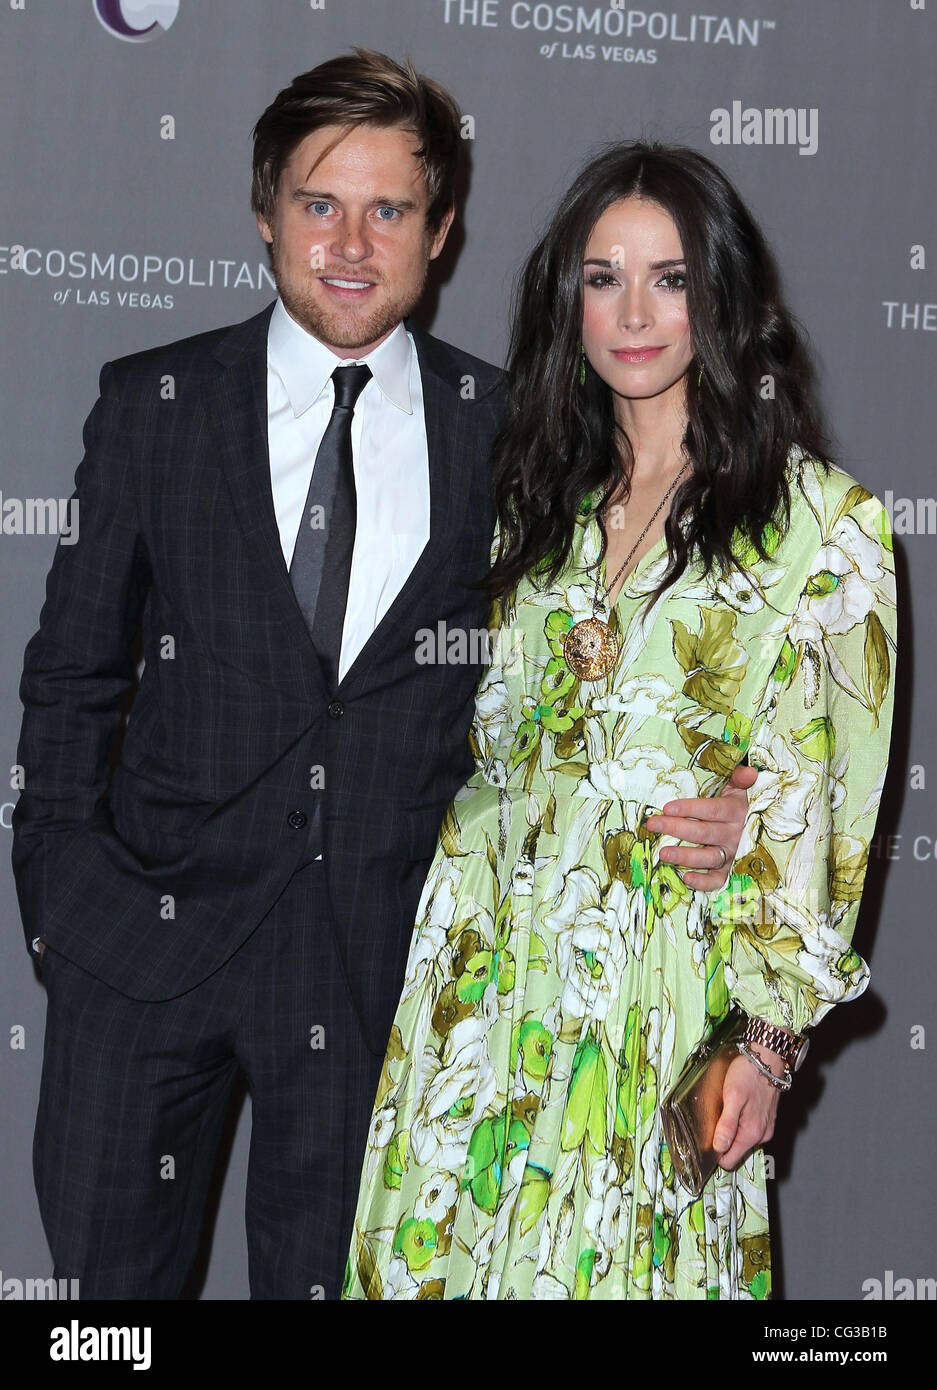 Andrew Pruett and Abigail Spencer    The Cosmopolitan Grand Opening and New Year's Eve Celebration at Marquee Nightclub in The Cosmopolitan Las Vegas, Nevada - 31.12.10 Stock Photo